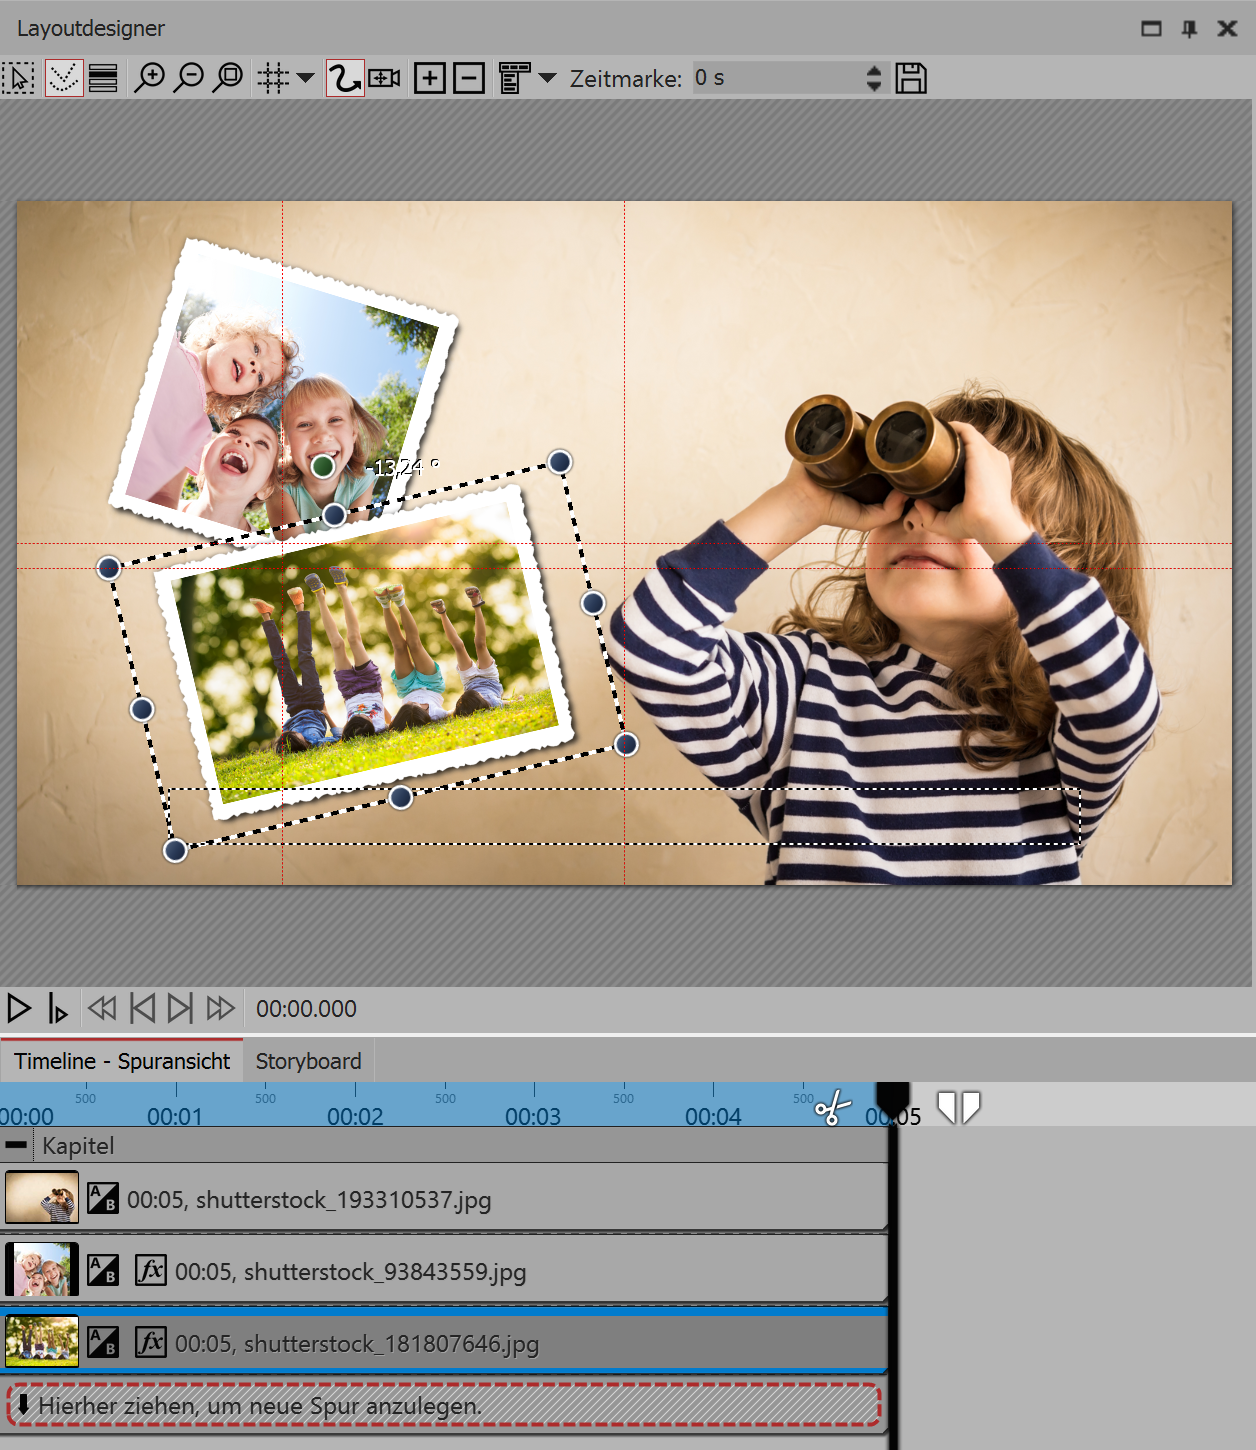 Creating a picture-in-picture effect in the layout designer